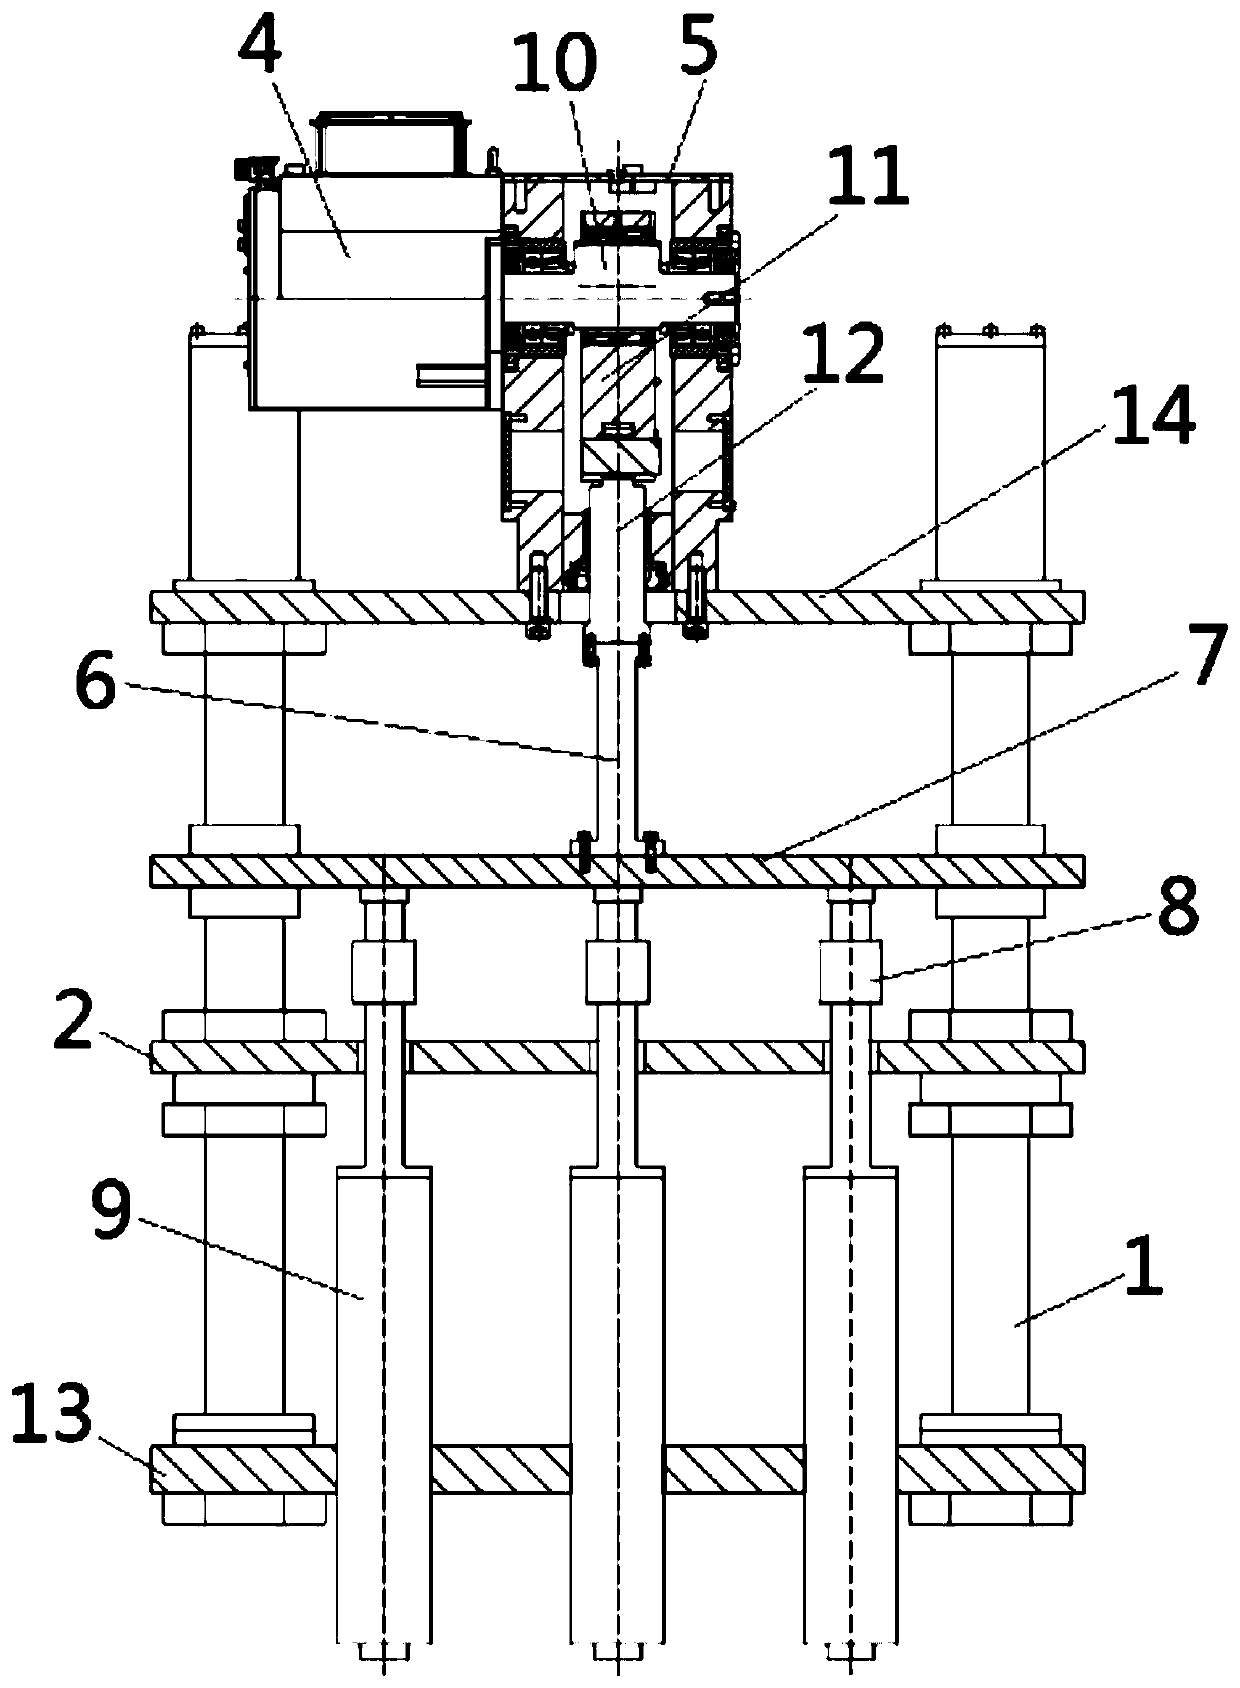 Integrating device capable of controlling wall thickness of bottle blowing machine with crank connecting rod mechanism driven by motor